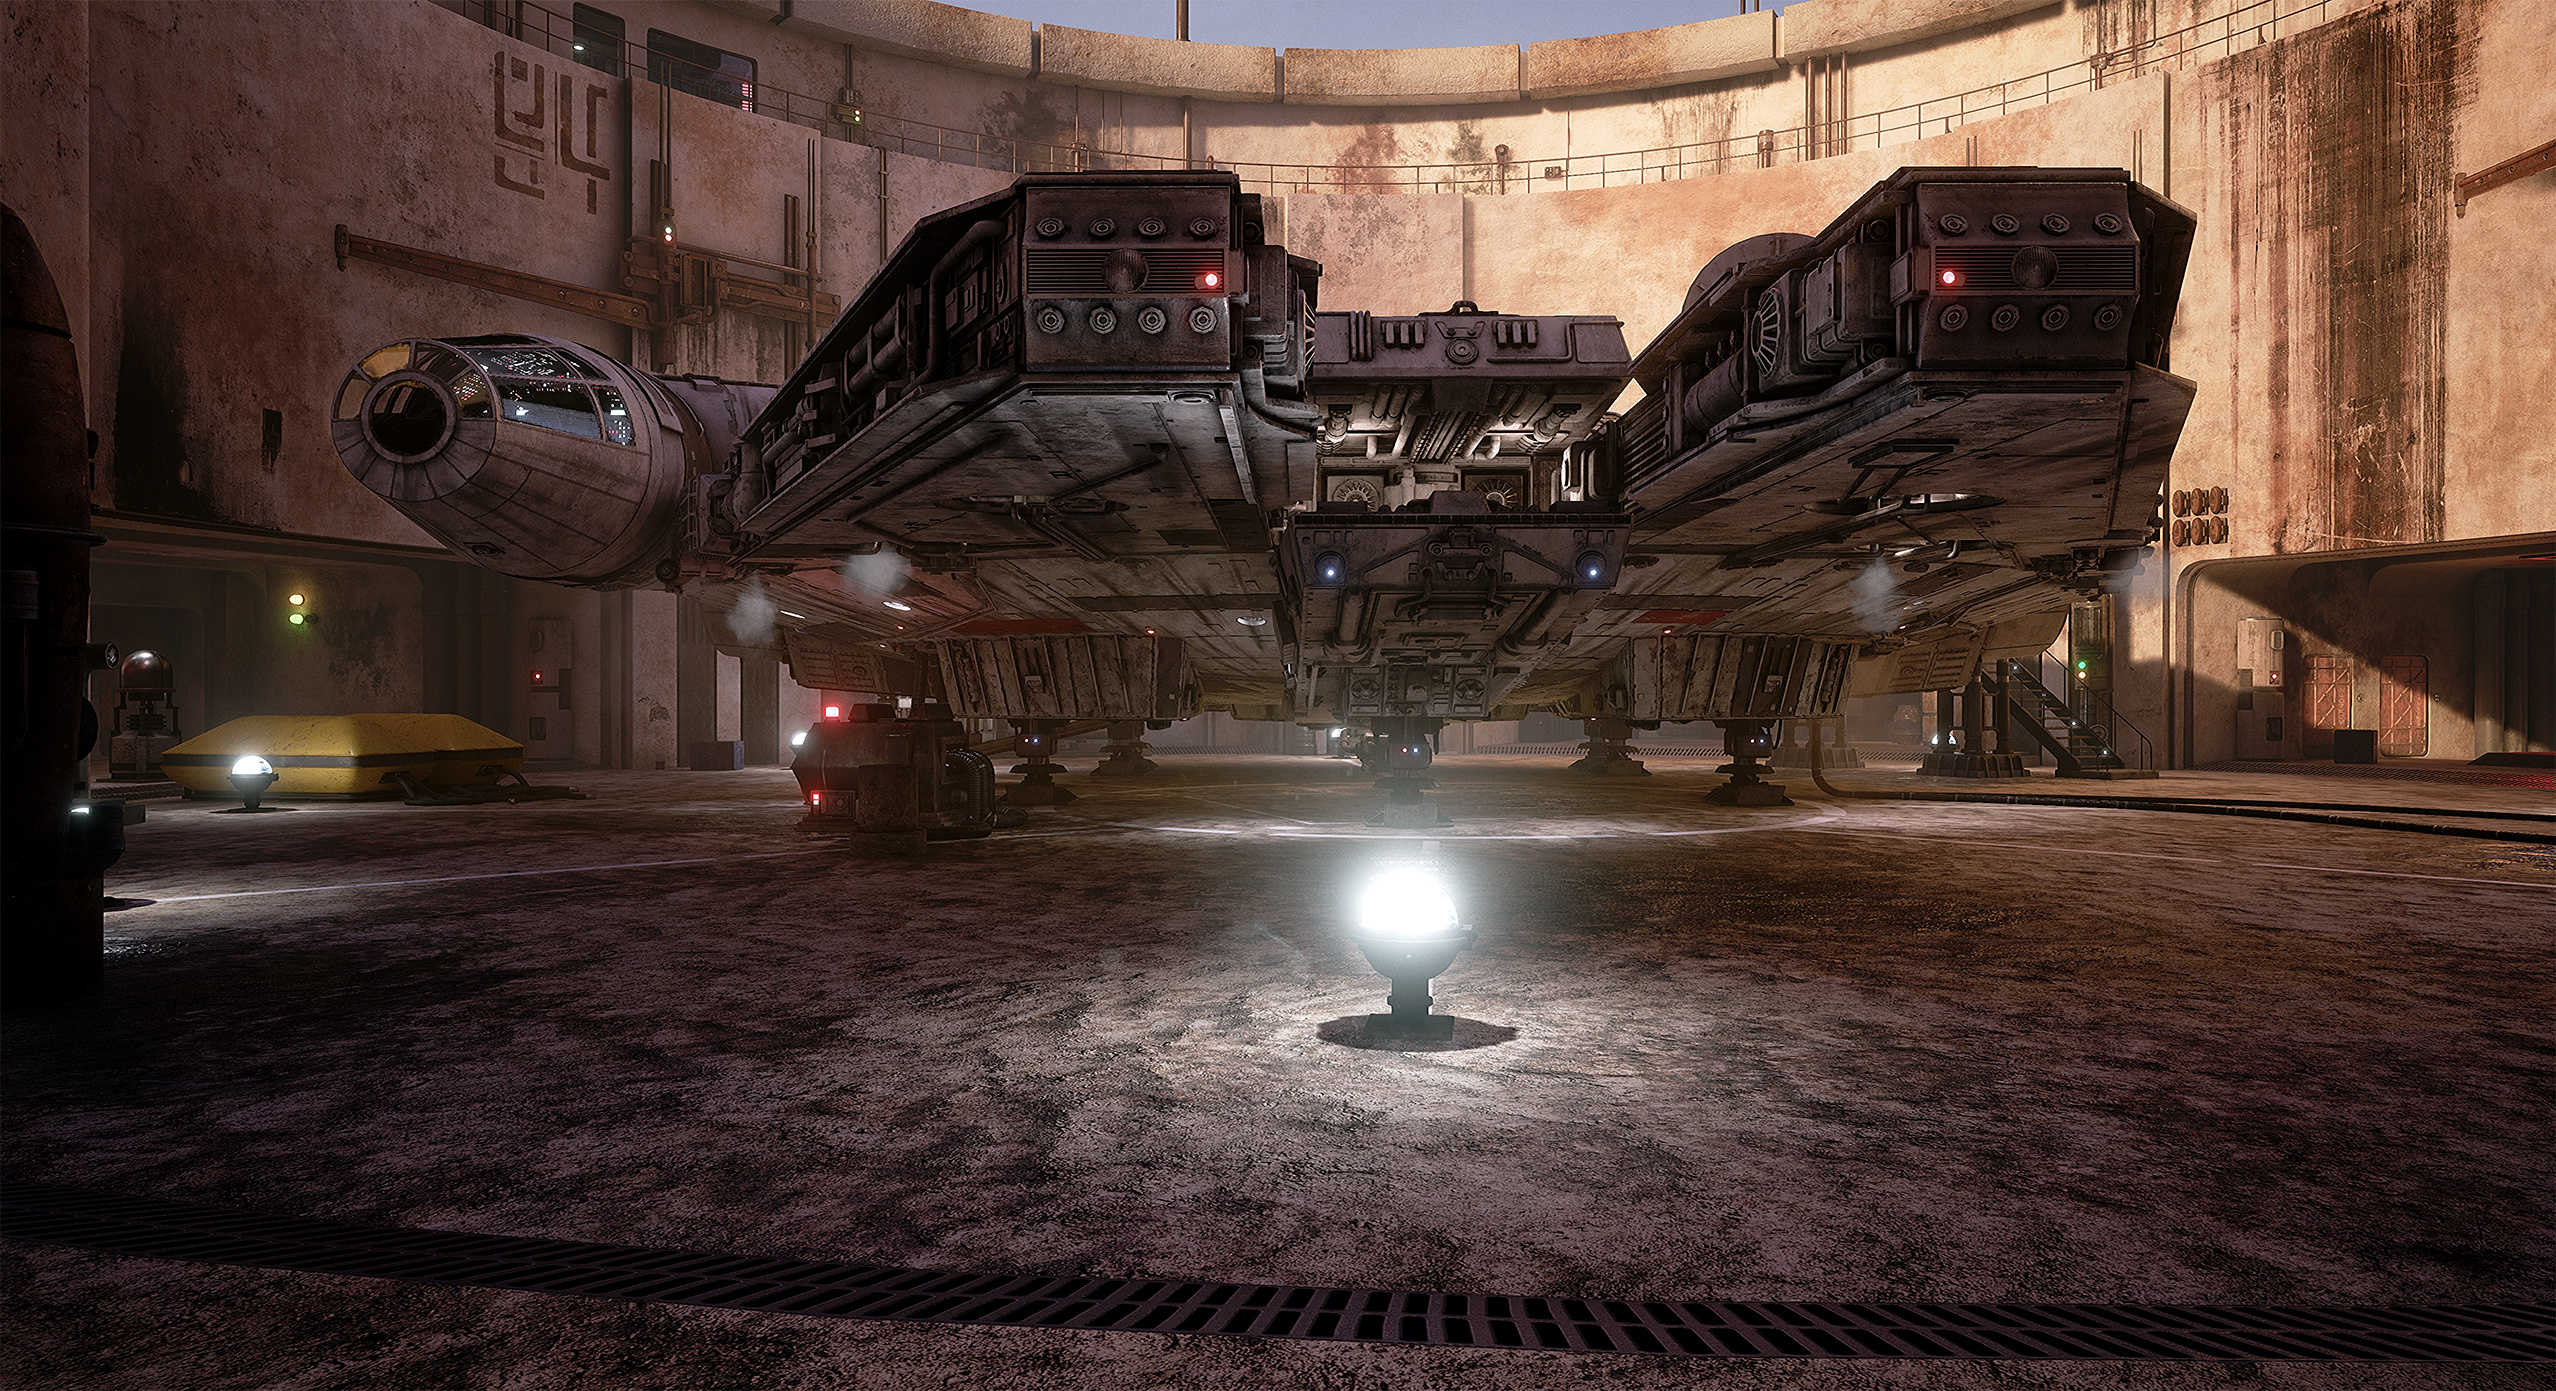 The Unreal Engine 4 Recreation Of Star Wars Looks Real Good